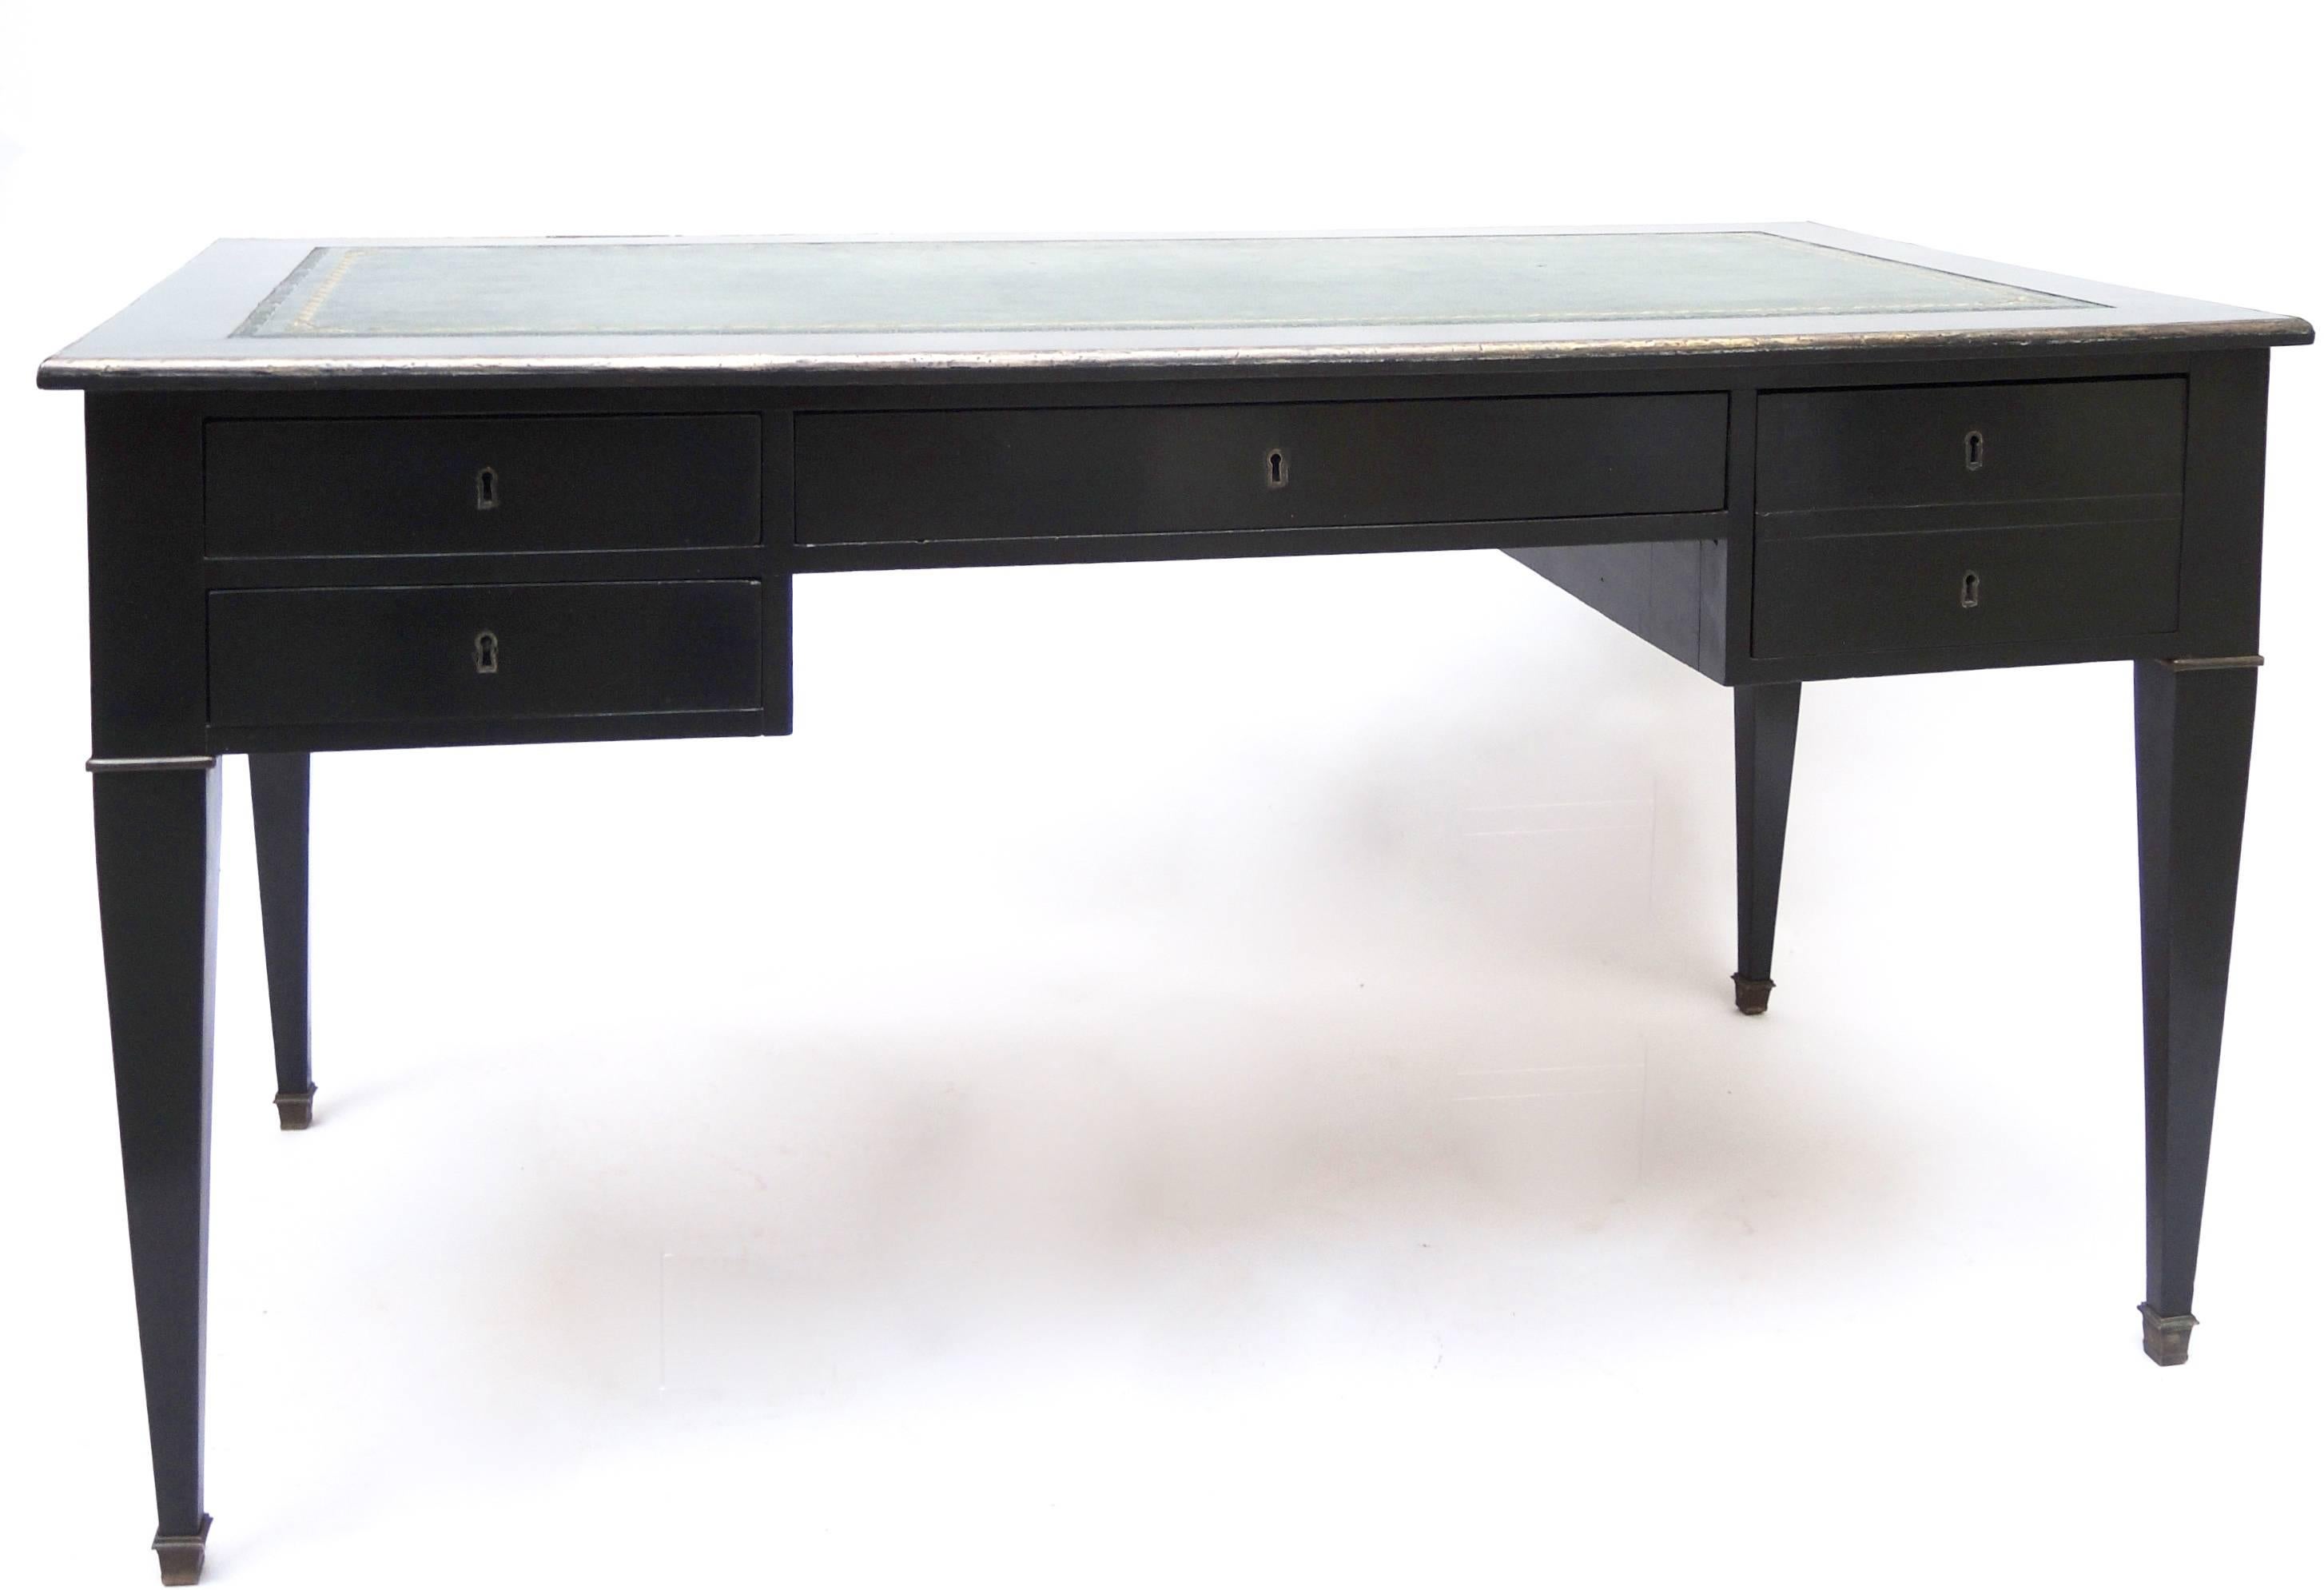 Black ebonized French Empire desk with green leather writing surface .There are additional pull-out writing surfaces on each side, both with matching green leather inset surfaces. Brass edging and foot caps.
 